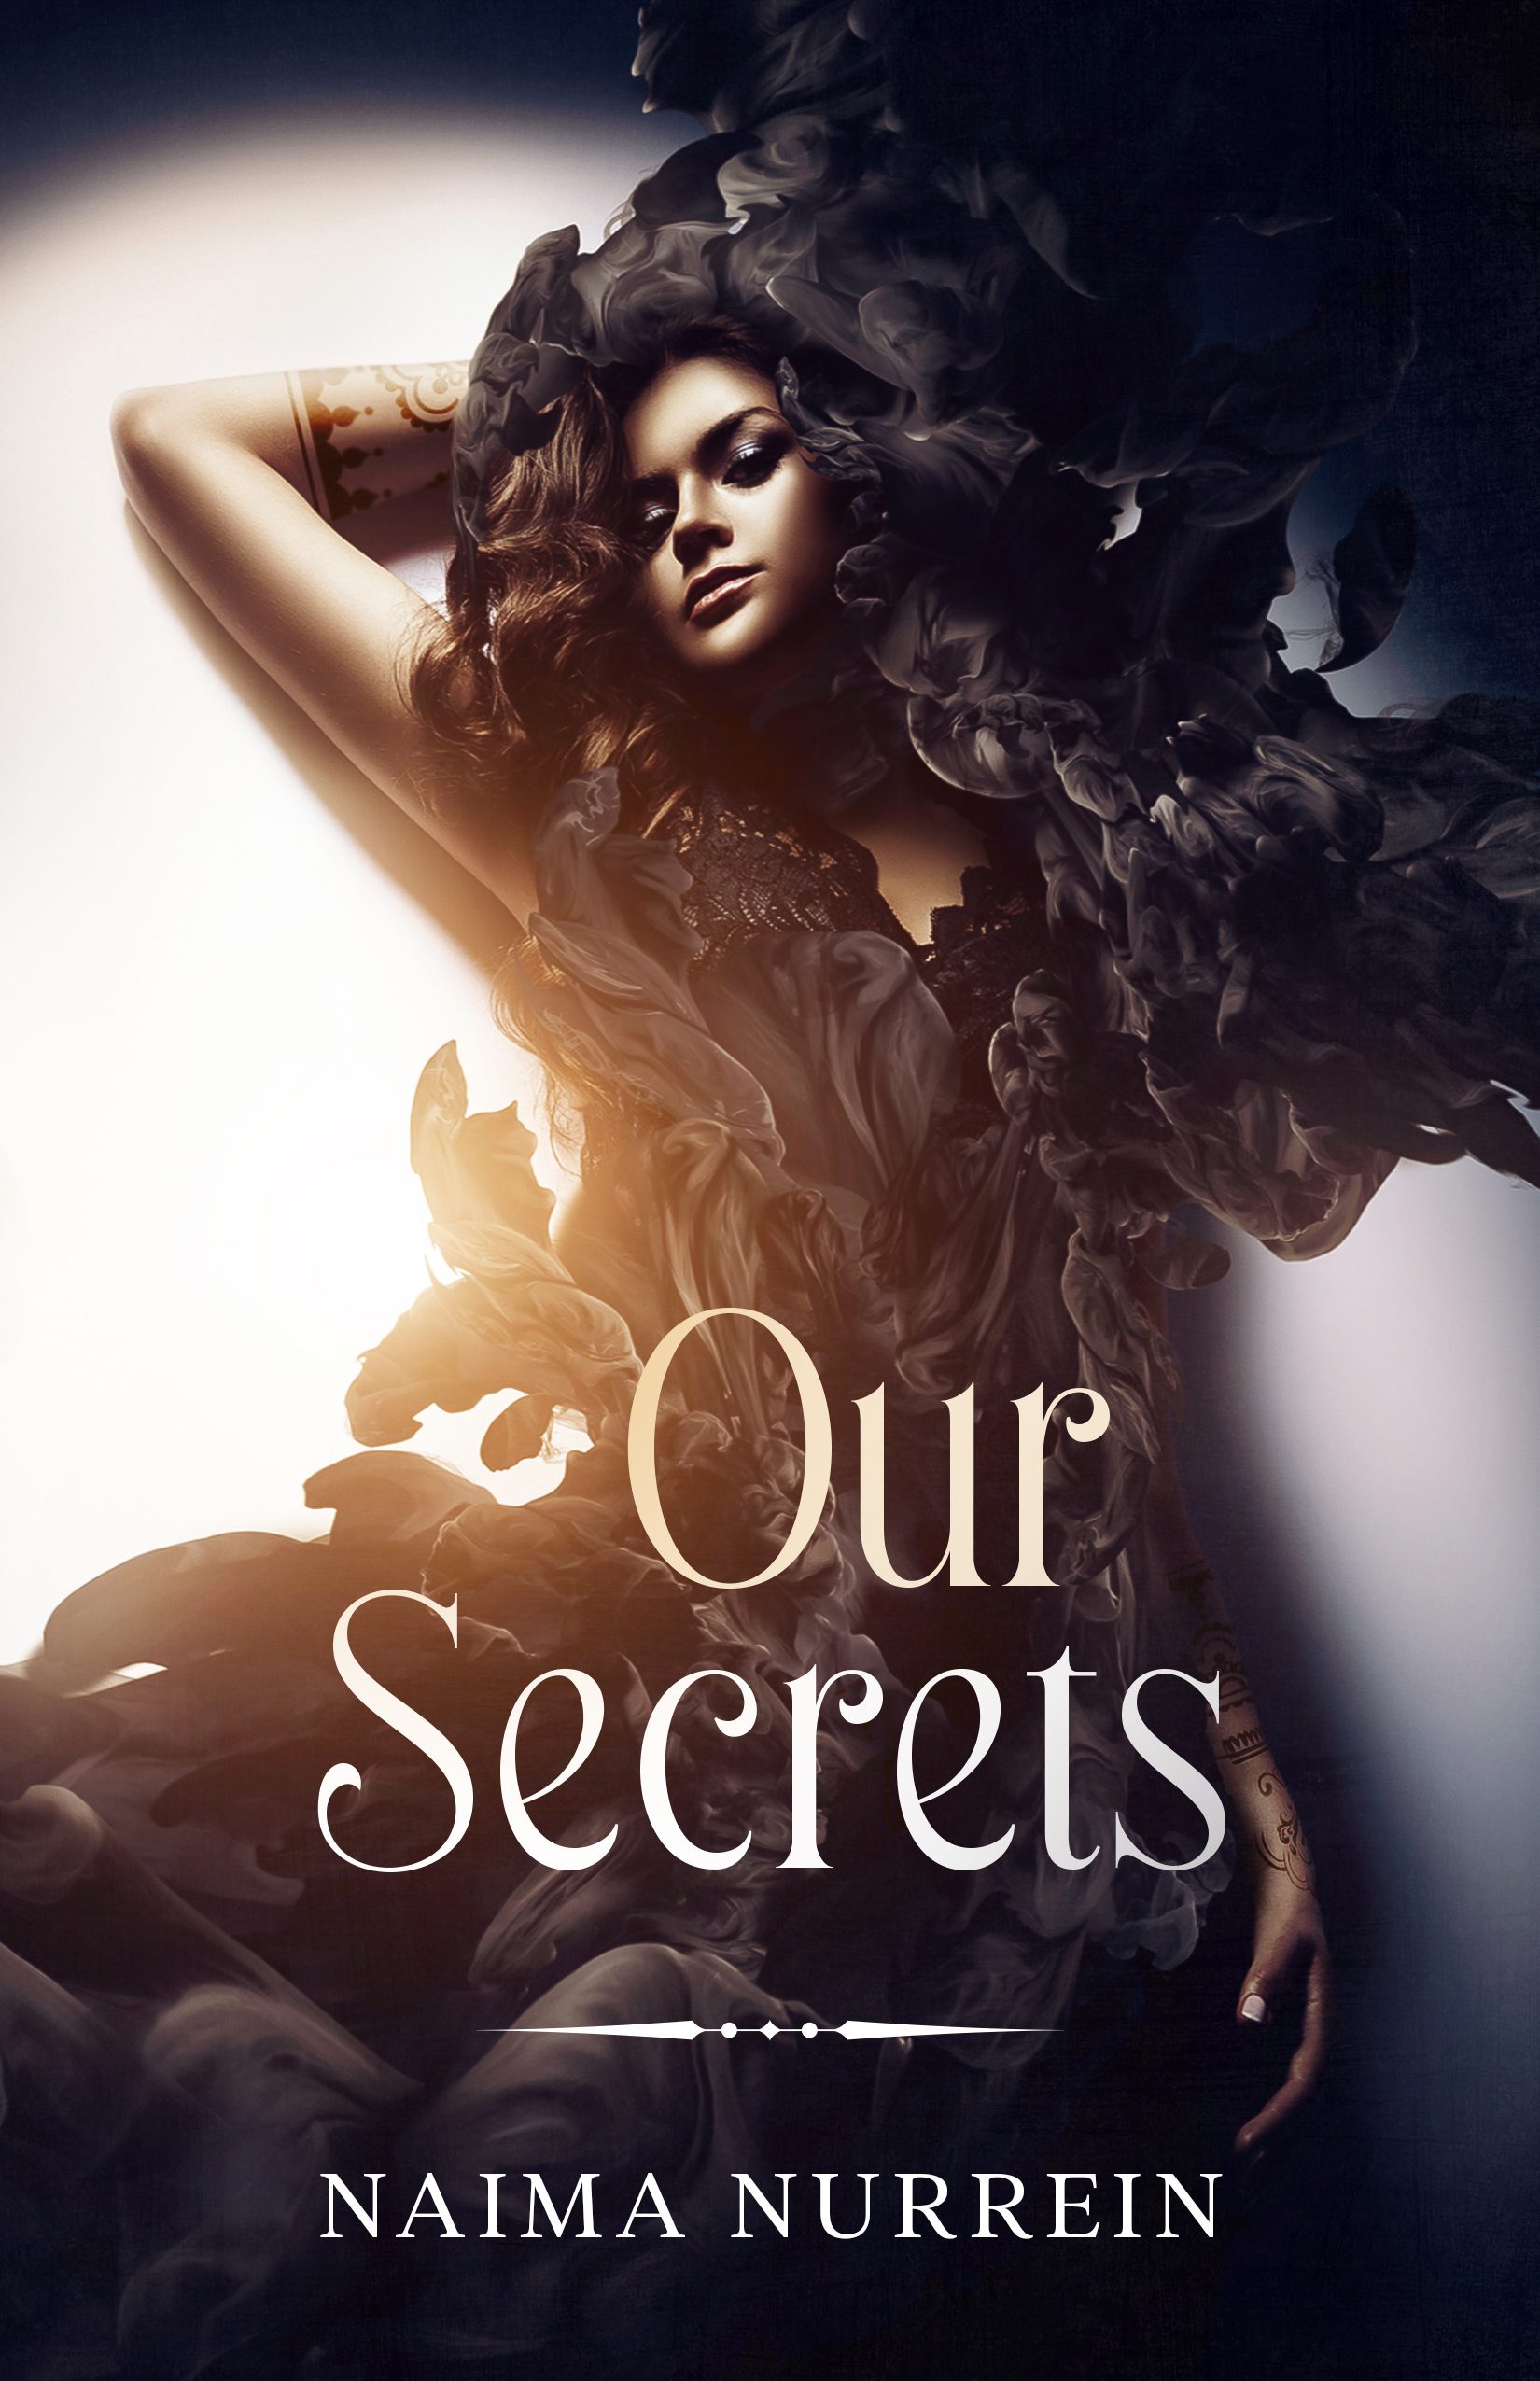 Book cover for the novel Our Secrets